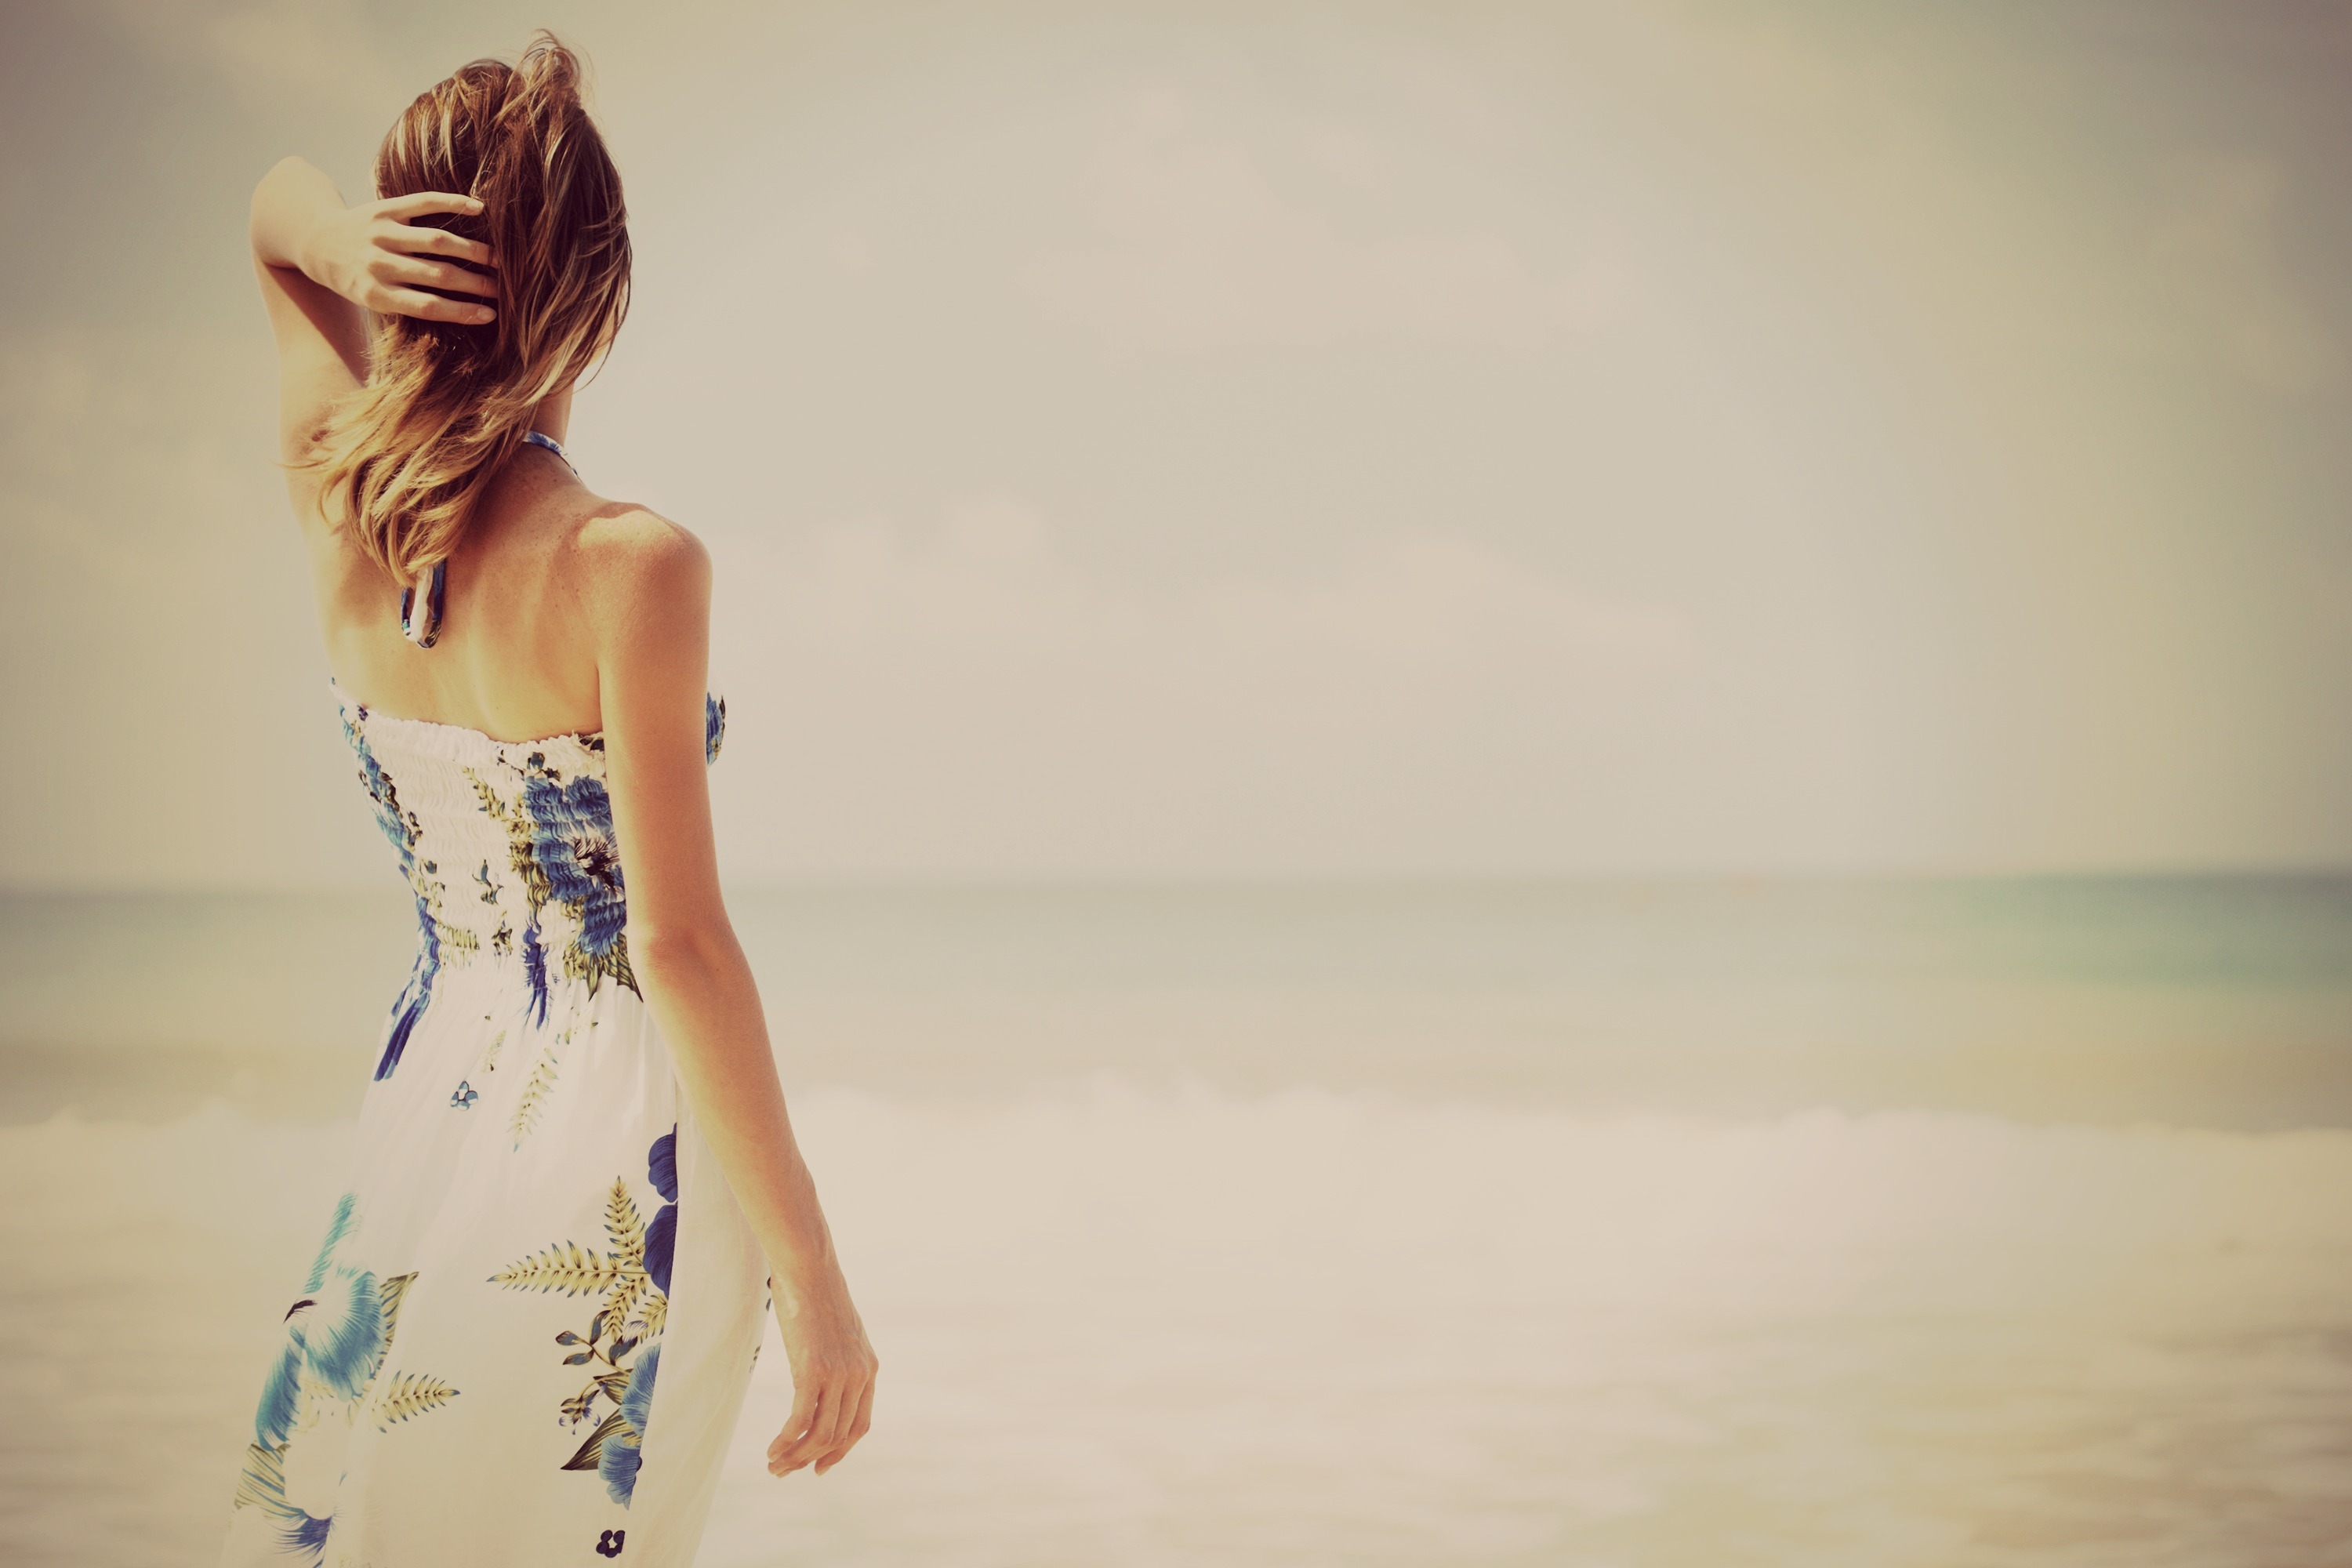 Girl enjoying the sea breeze wallpapers and images - wallpapers ...